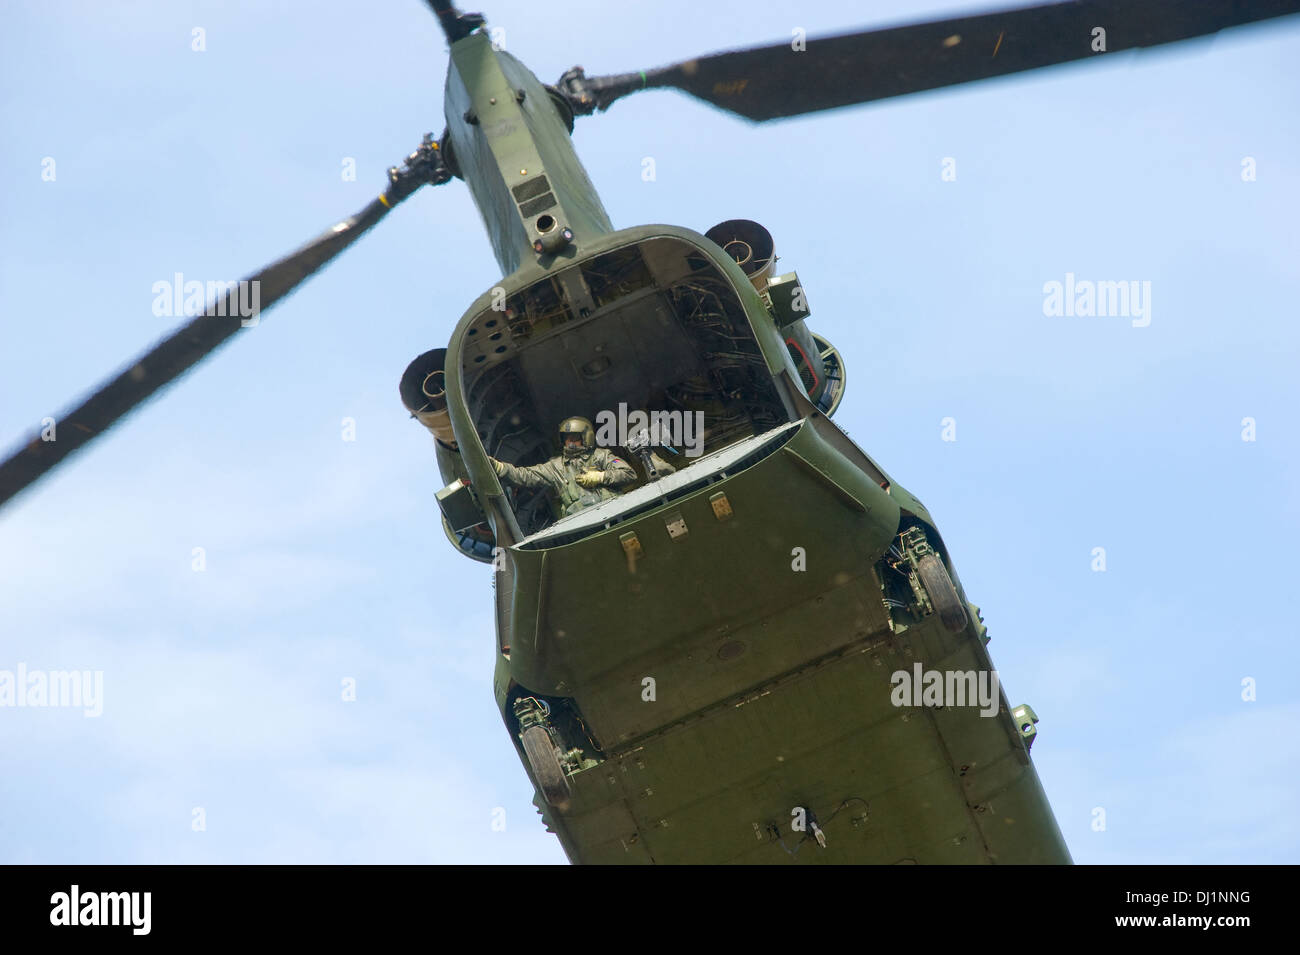 A chinook helicopter from the dutch air force just picked up some soldiers and took off Stock Photo